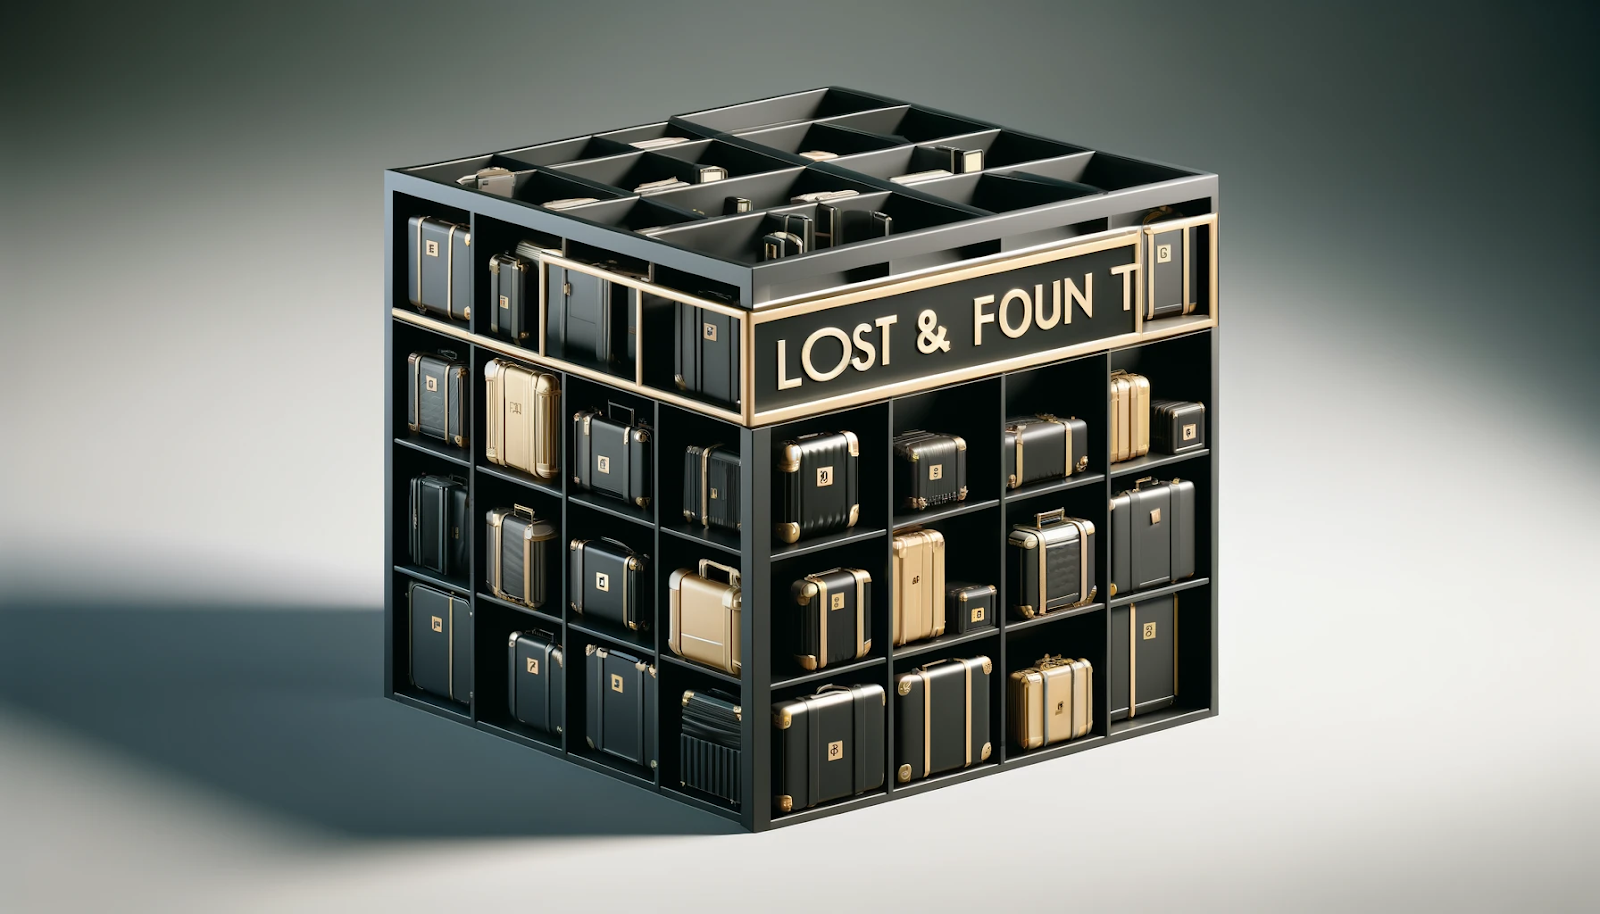 A photorealistic image showing a well-organized lost and found system featuring neatly arranged shelves in black and gold, symbolizing efficiency and order.